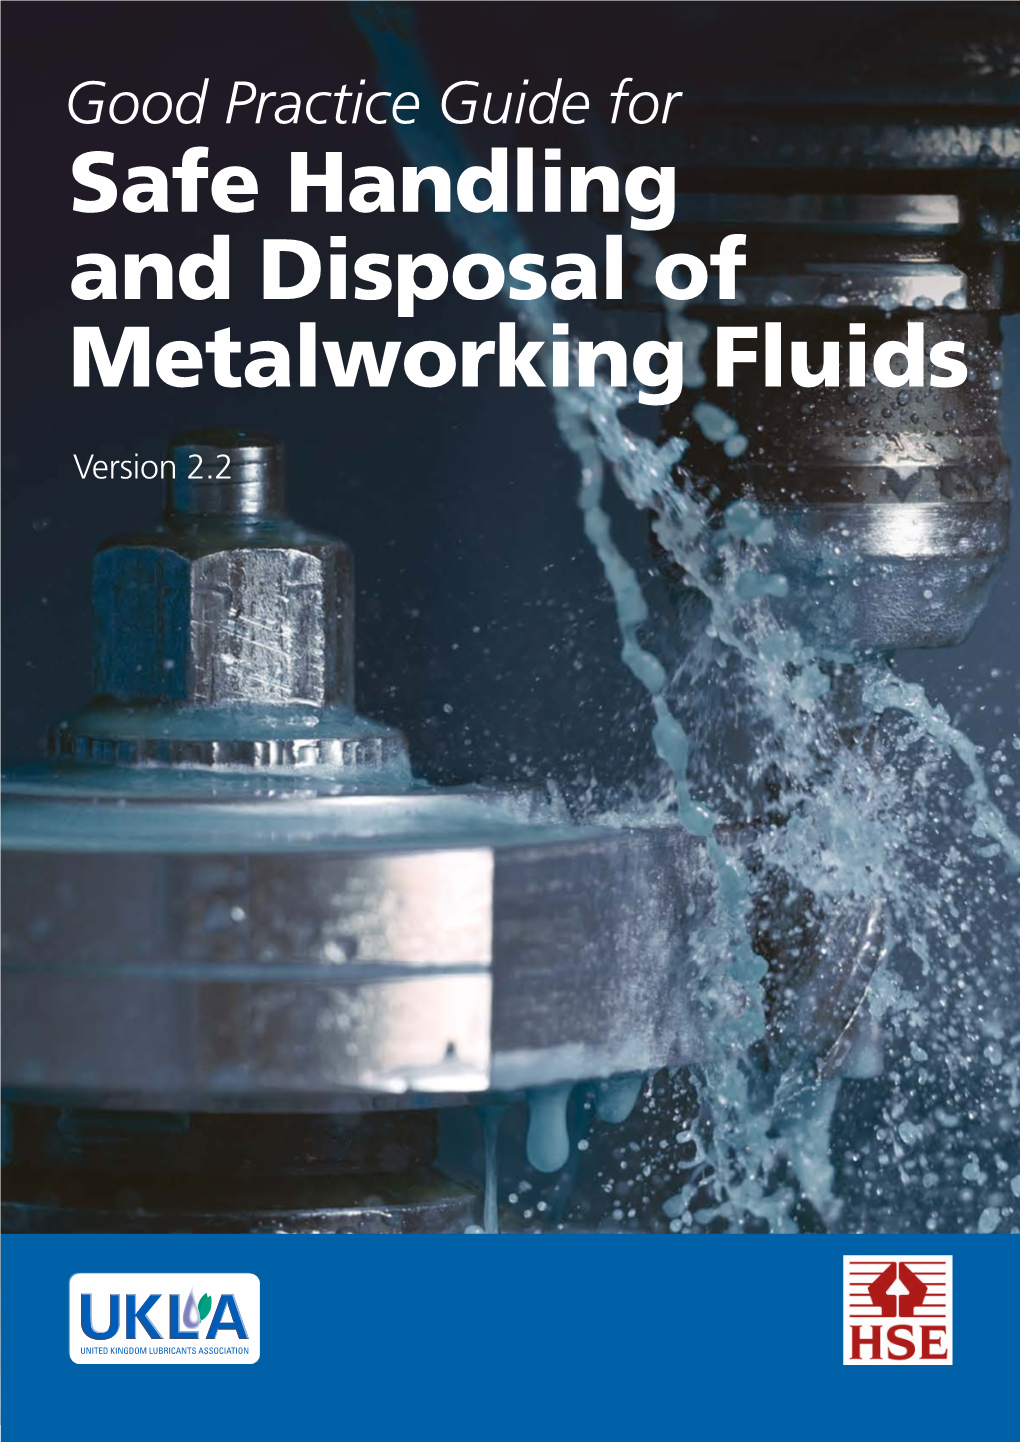 UKLA HSE Good Practice Guide for Safe Handling and Disposal of Metalworking Fluids